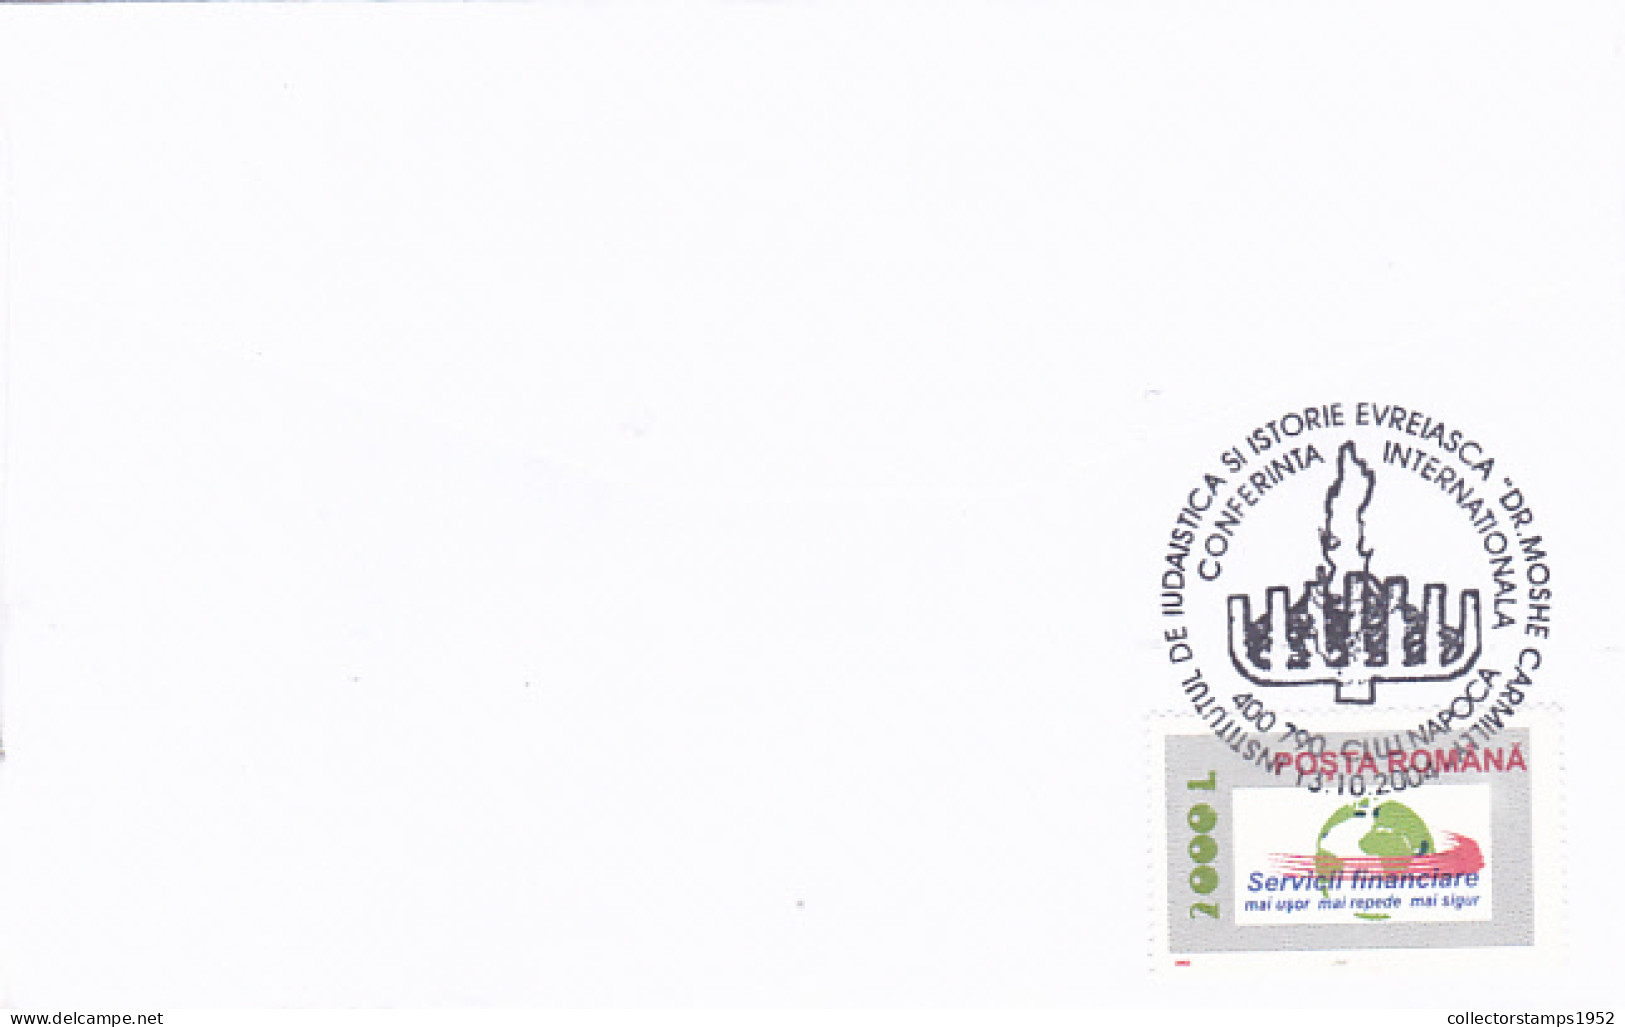 MOSHE CARMILLY JEWISH INSTITUTE, CONFERENCE, JEWISH, RELIGION, SPECIAL COVER, OVERPRINT STAMP, 2004, ROMANIA - Guidaismo